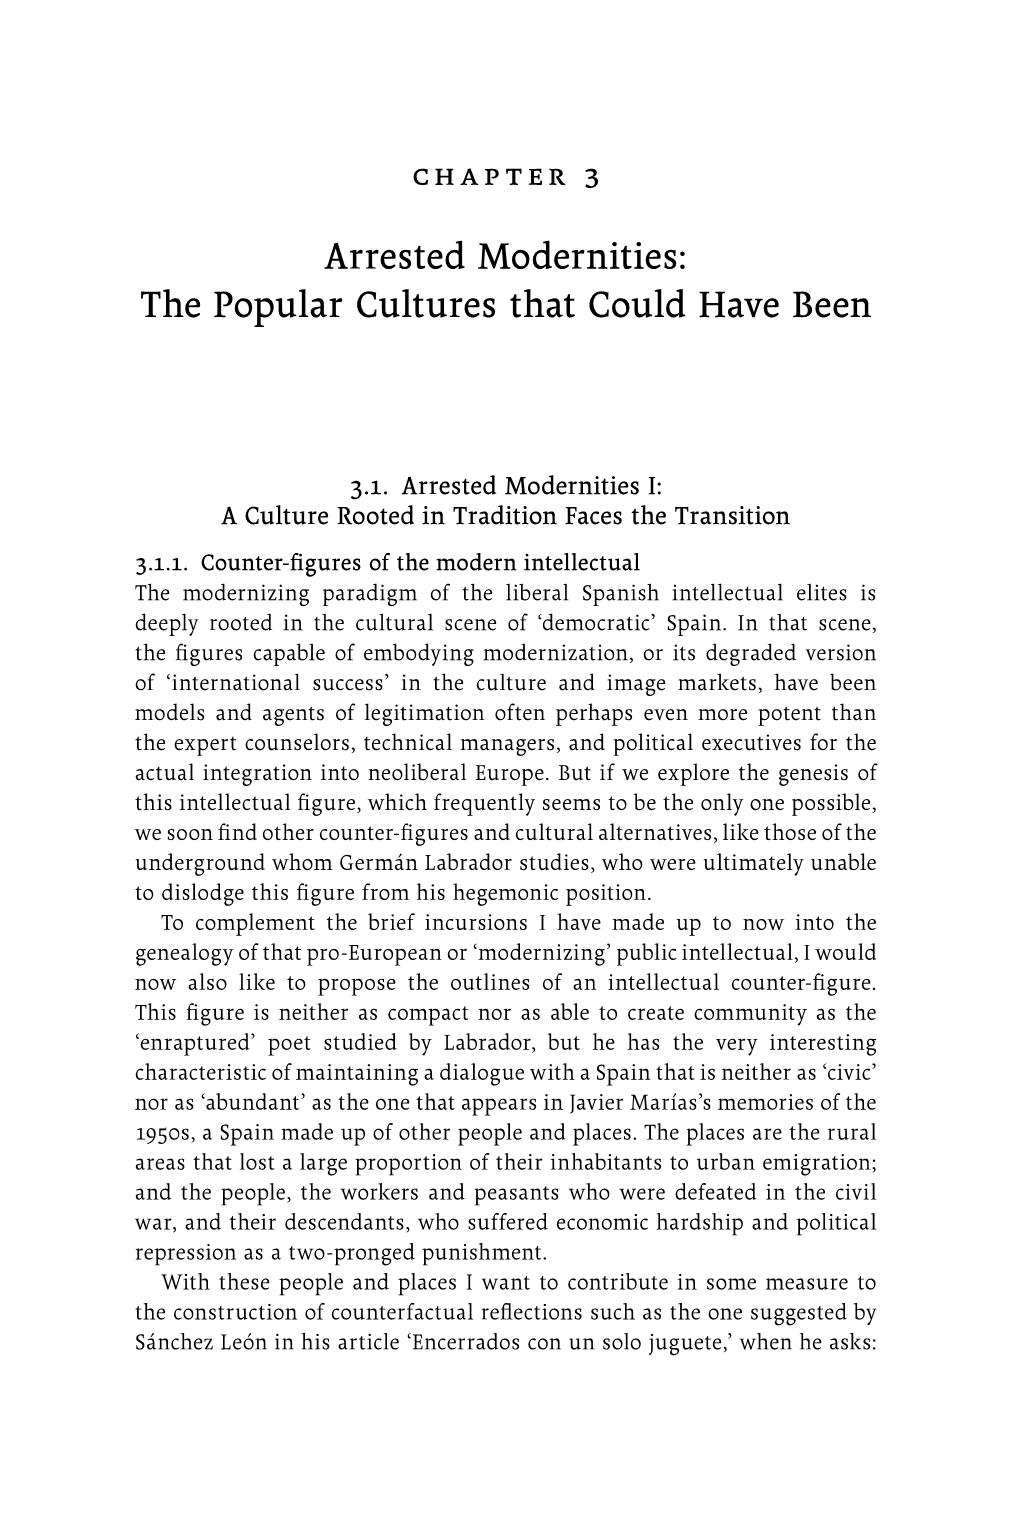 Arrested Modernities: the Popular Cultures That Could Have Been Arrested Modernities